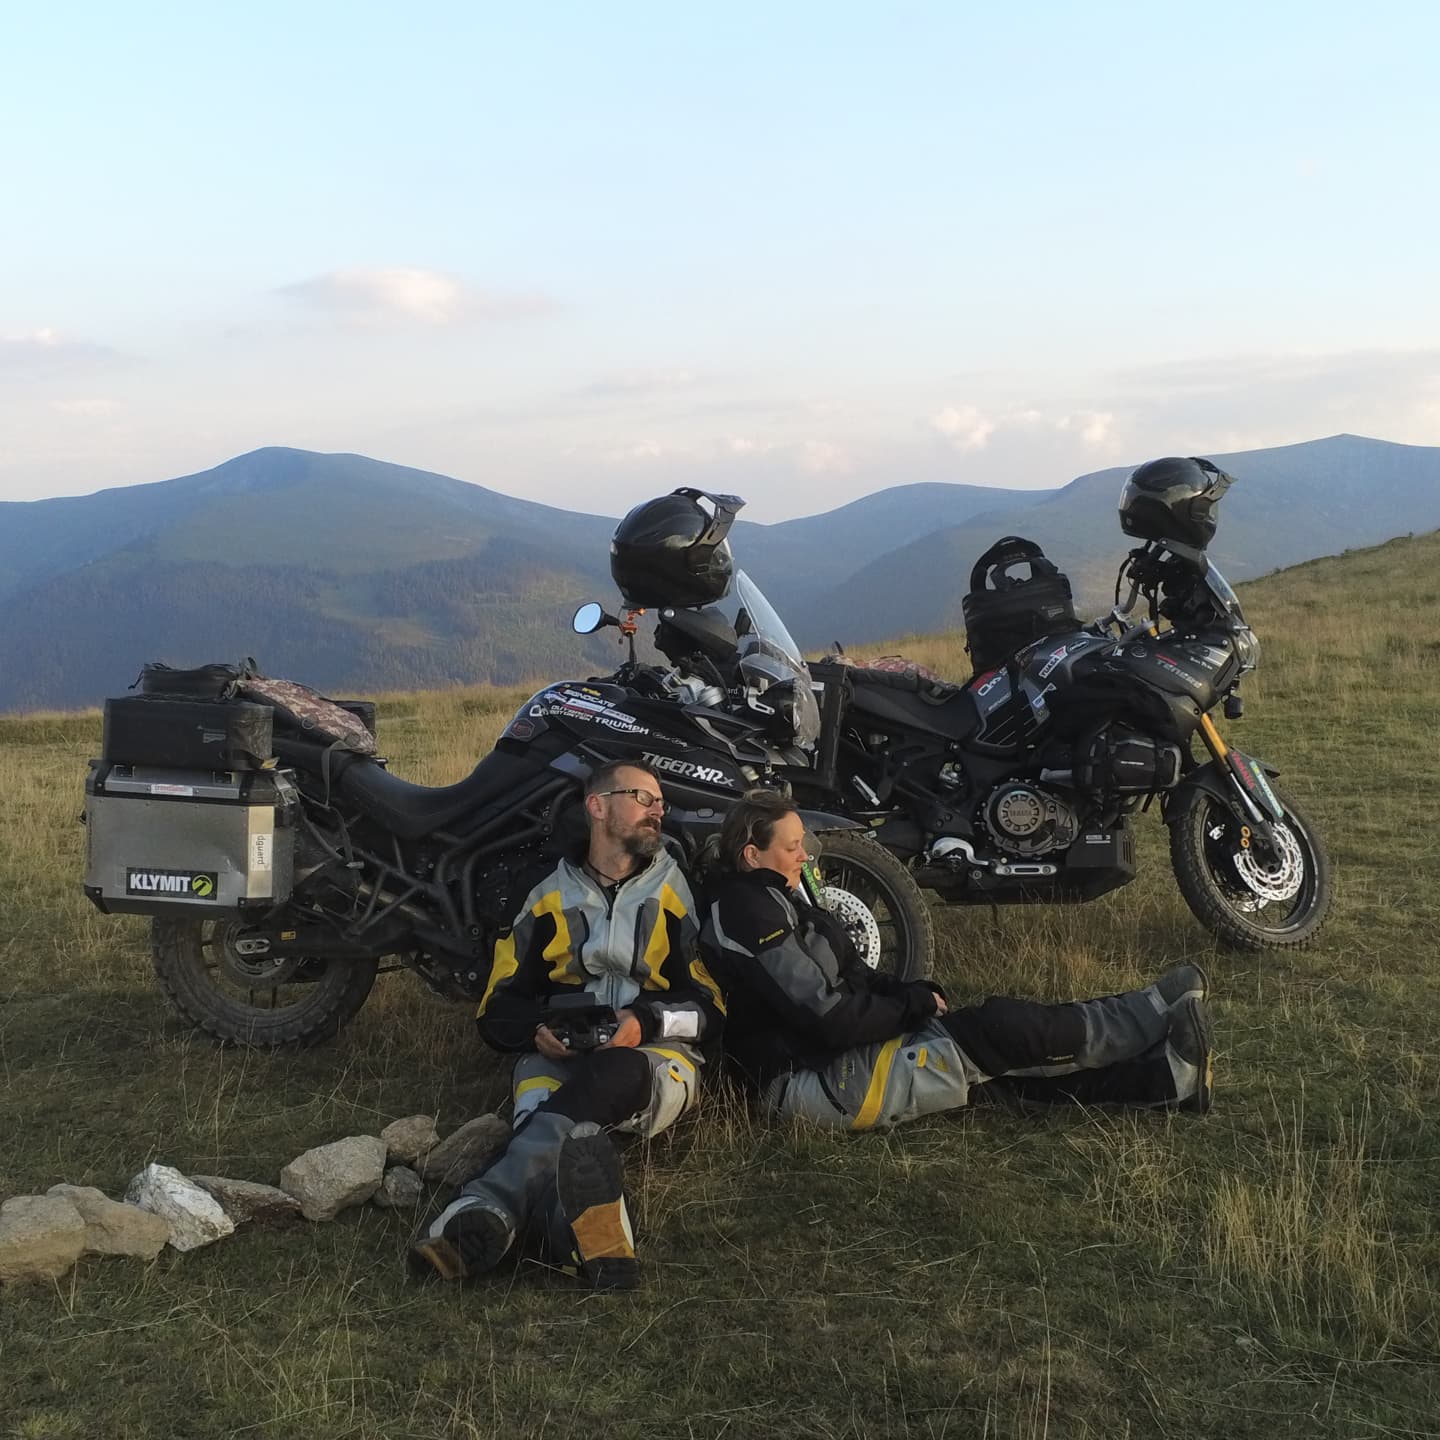 With the dguard tour diary, motorcyclists can record their tours and enjoy them again later.